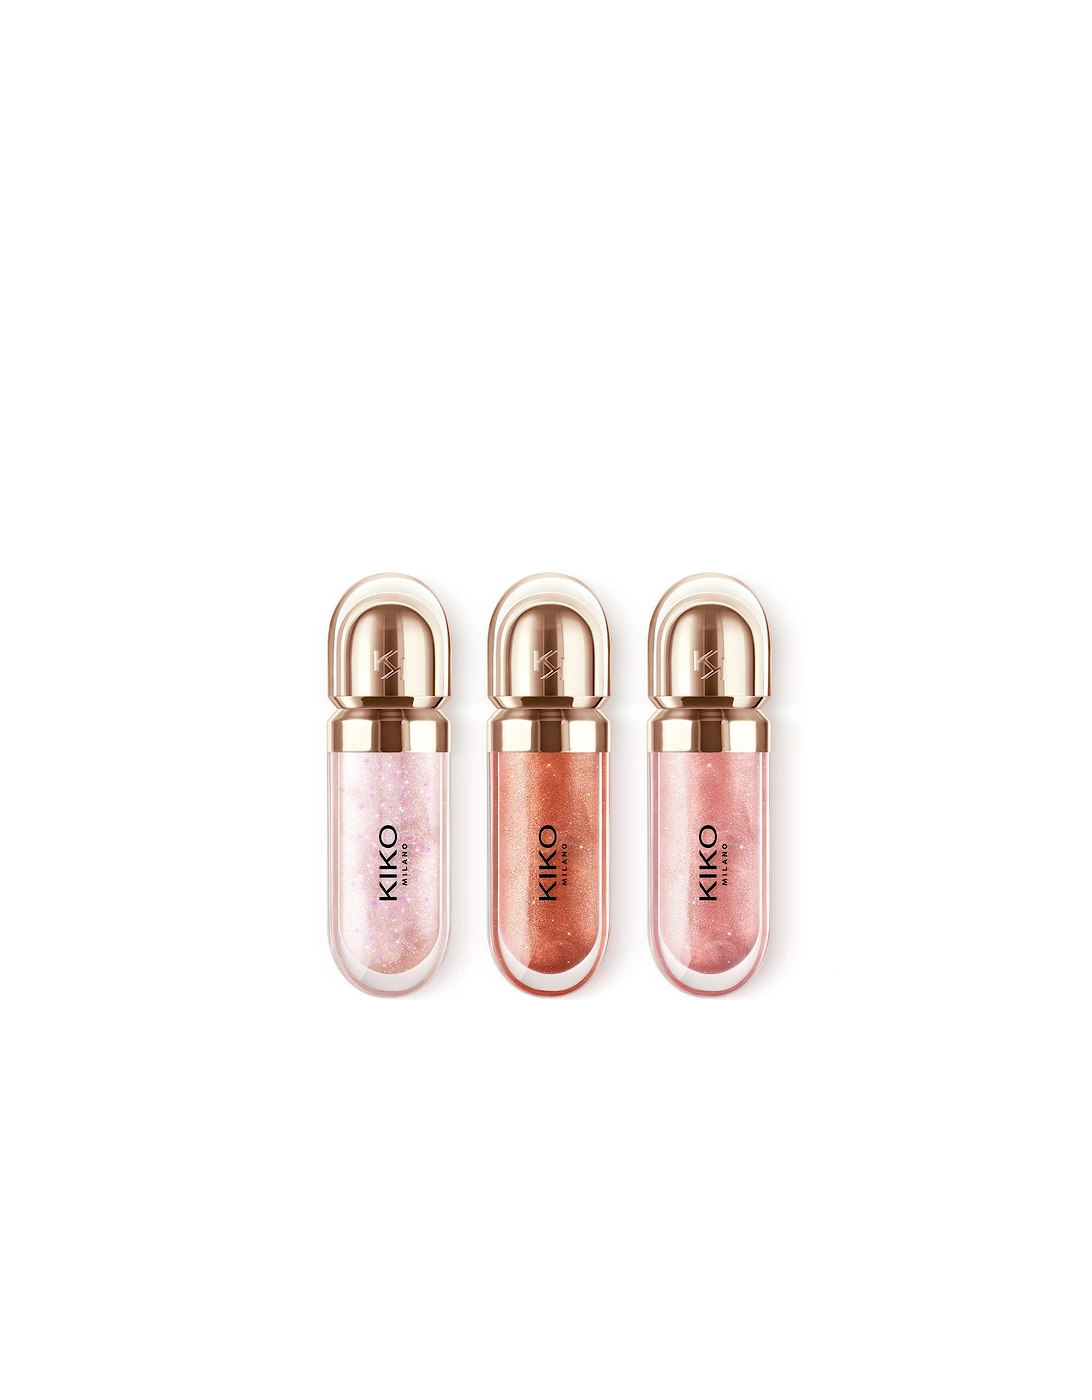 Exclusive 3D Hydra Lipgloss Limited Edition Trio, 2 of 1